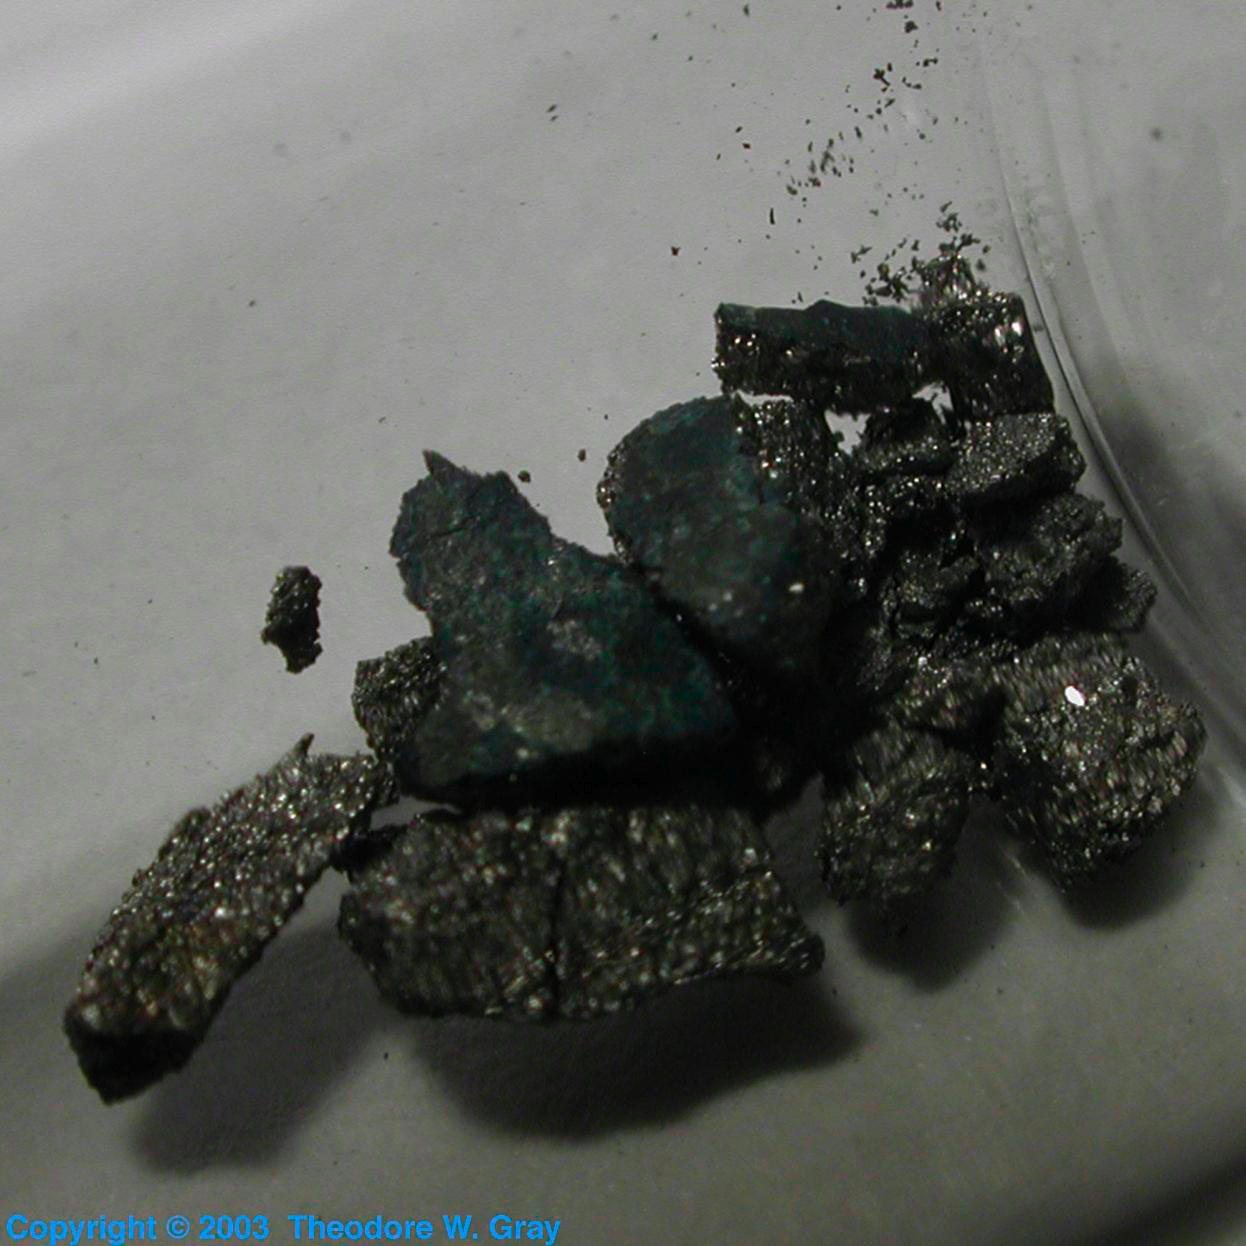 Tungsten Sample from the Everest Set